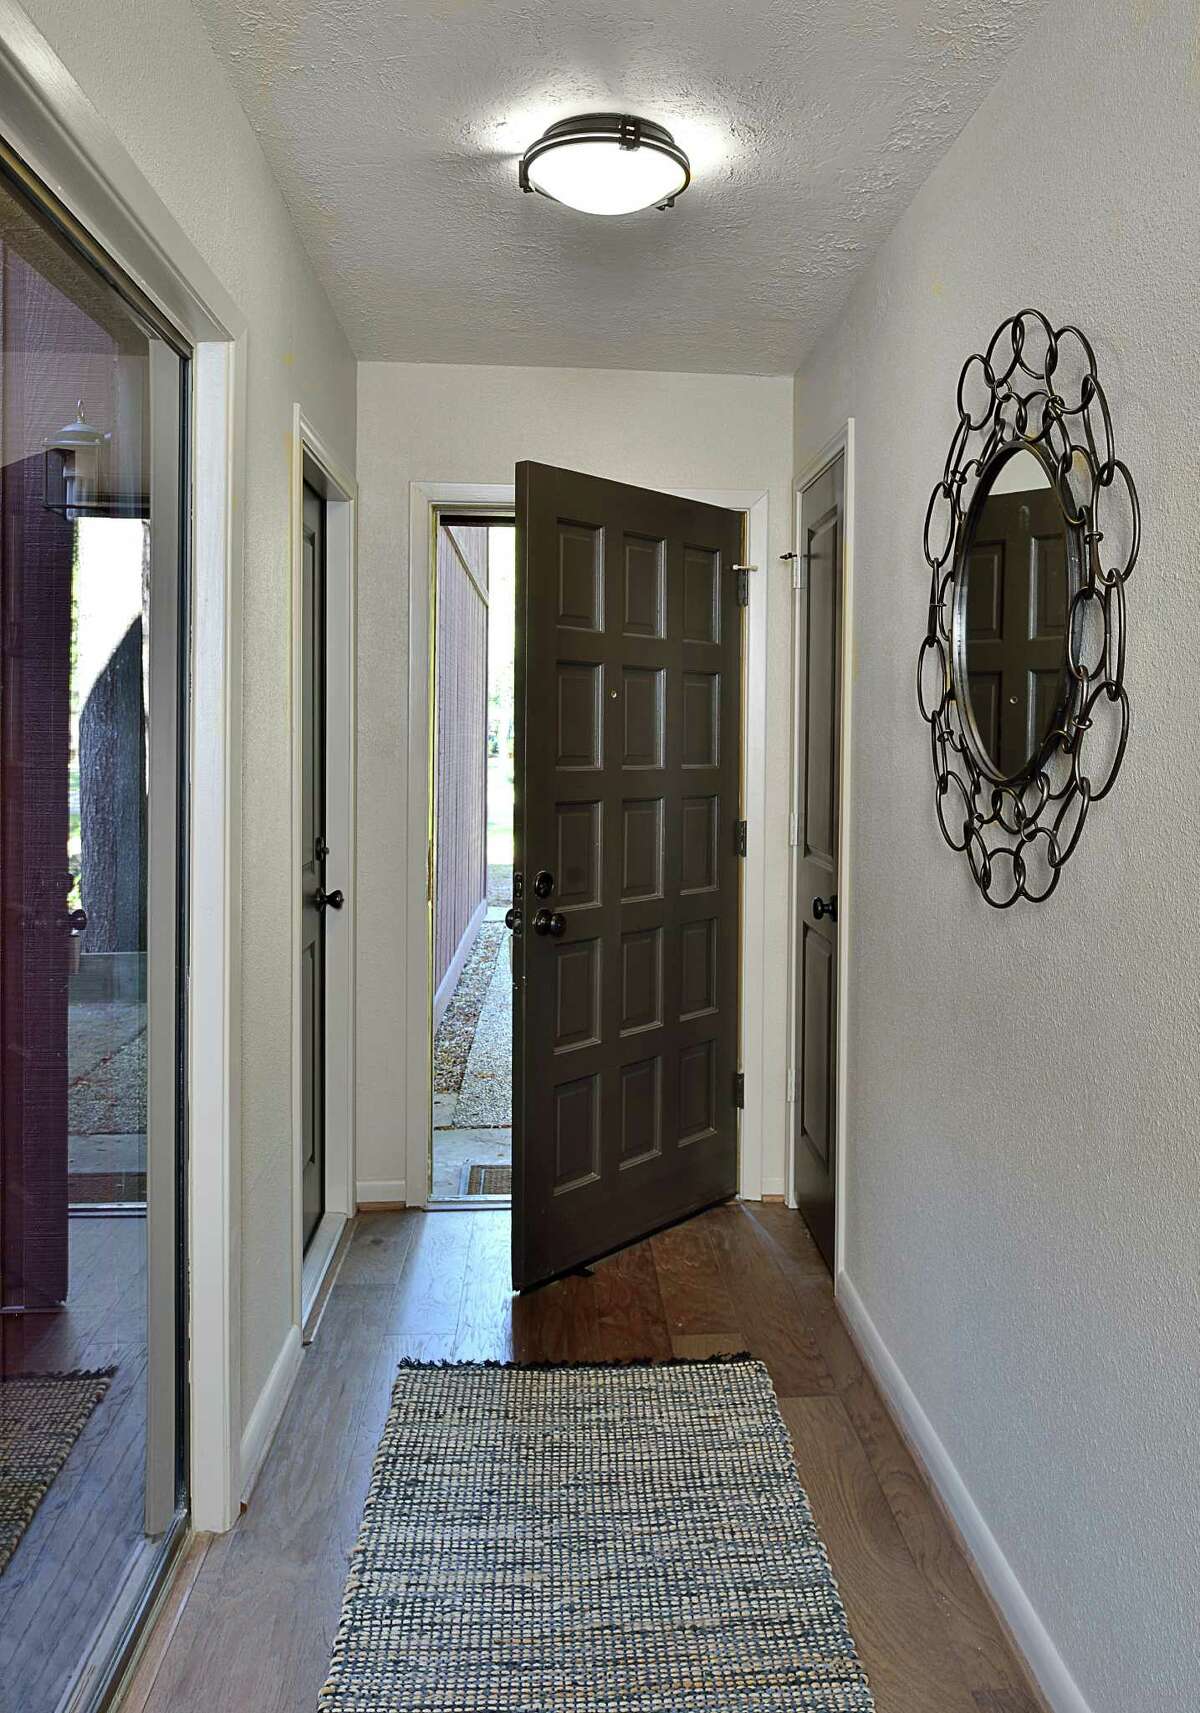 The front door was refinished with a dark stain, and wood floors replaced Spanish tile in the entryway and throughout the main living areas.